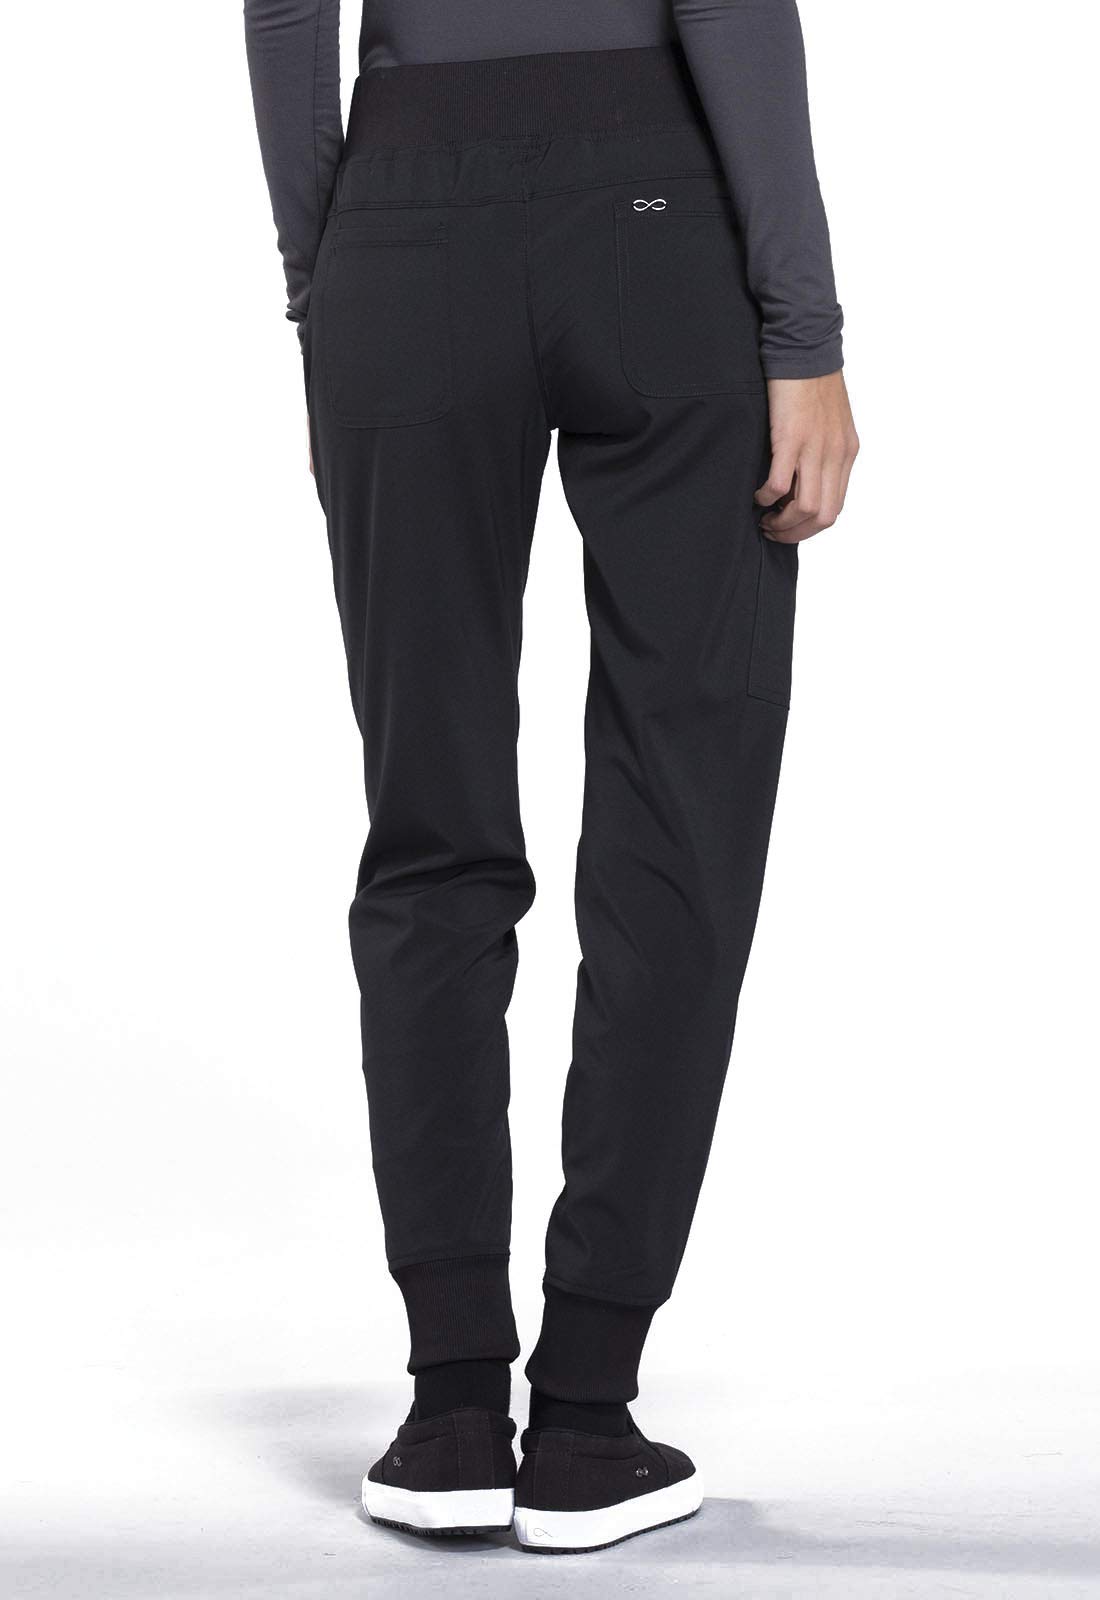 Jogger Scrub Pants for Women 4-Way Stretch with Mid Rise, Cargo Pocket, Superior Performance, and Comfort CK110A